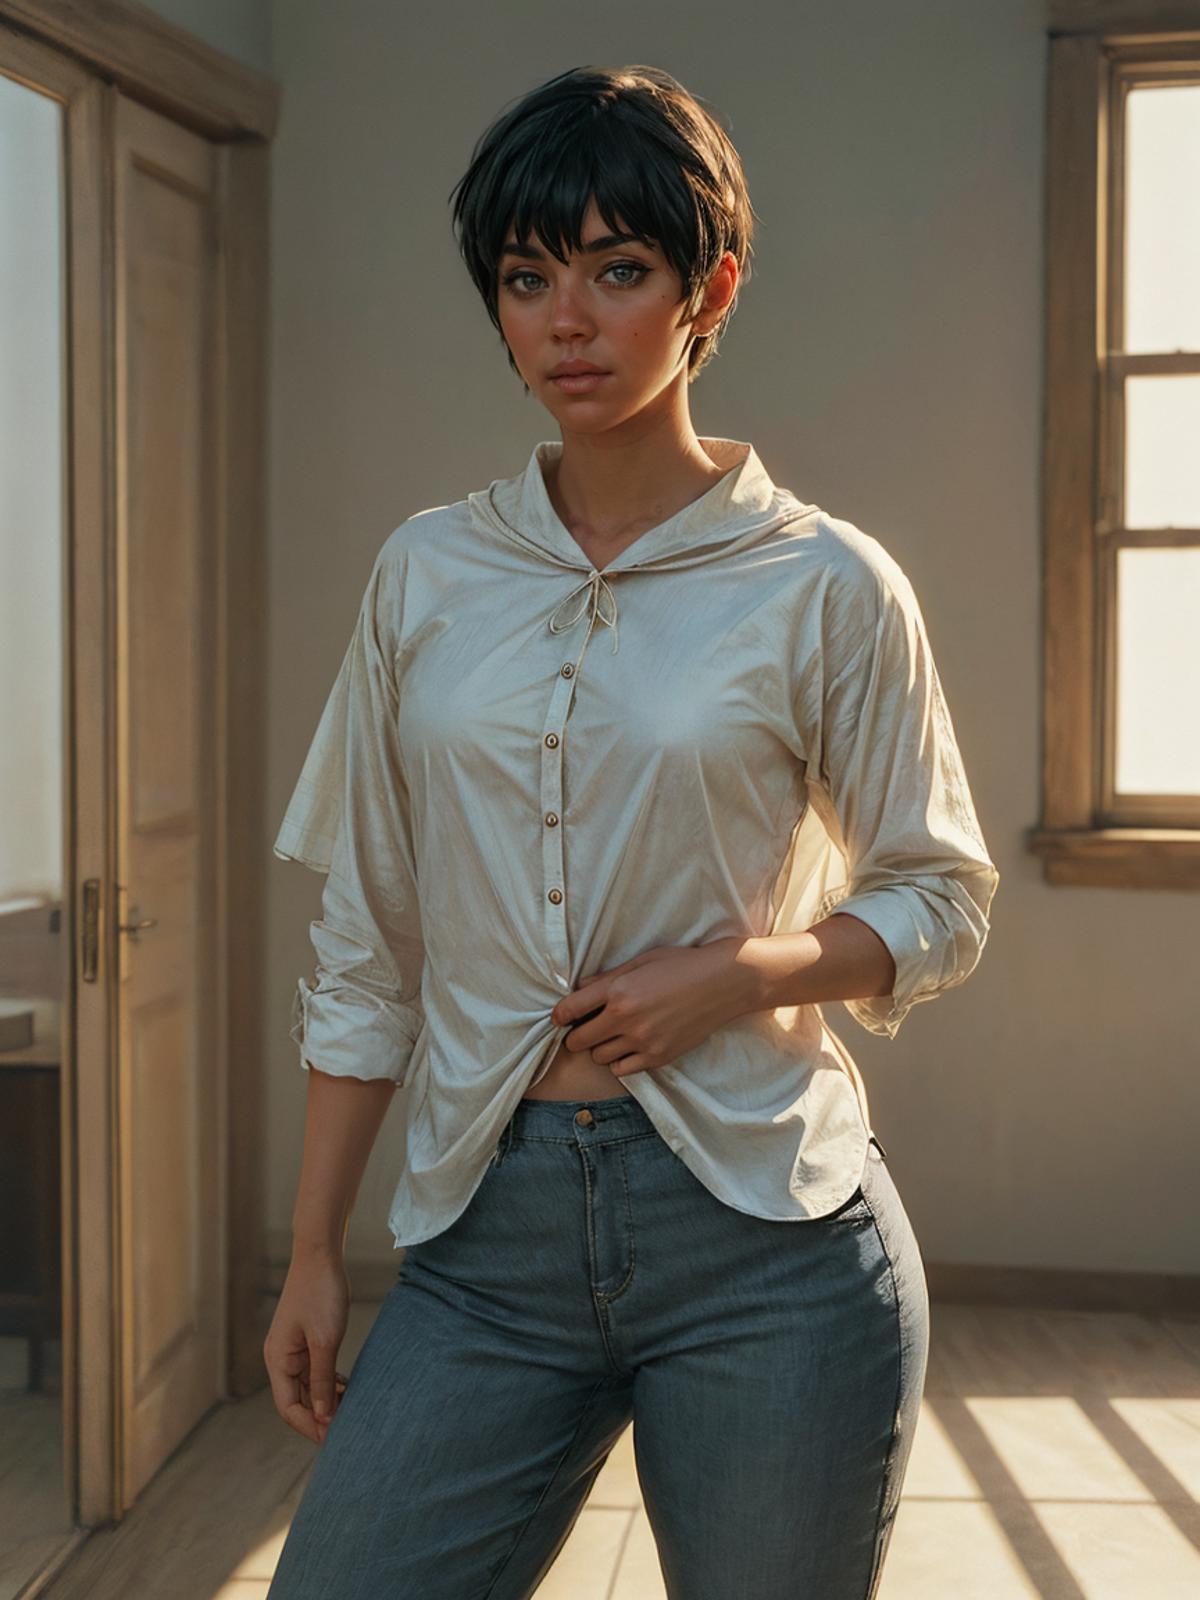 A woman wearing a white shirt and jeans.